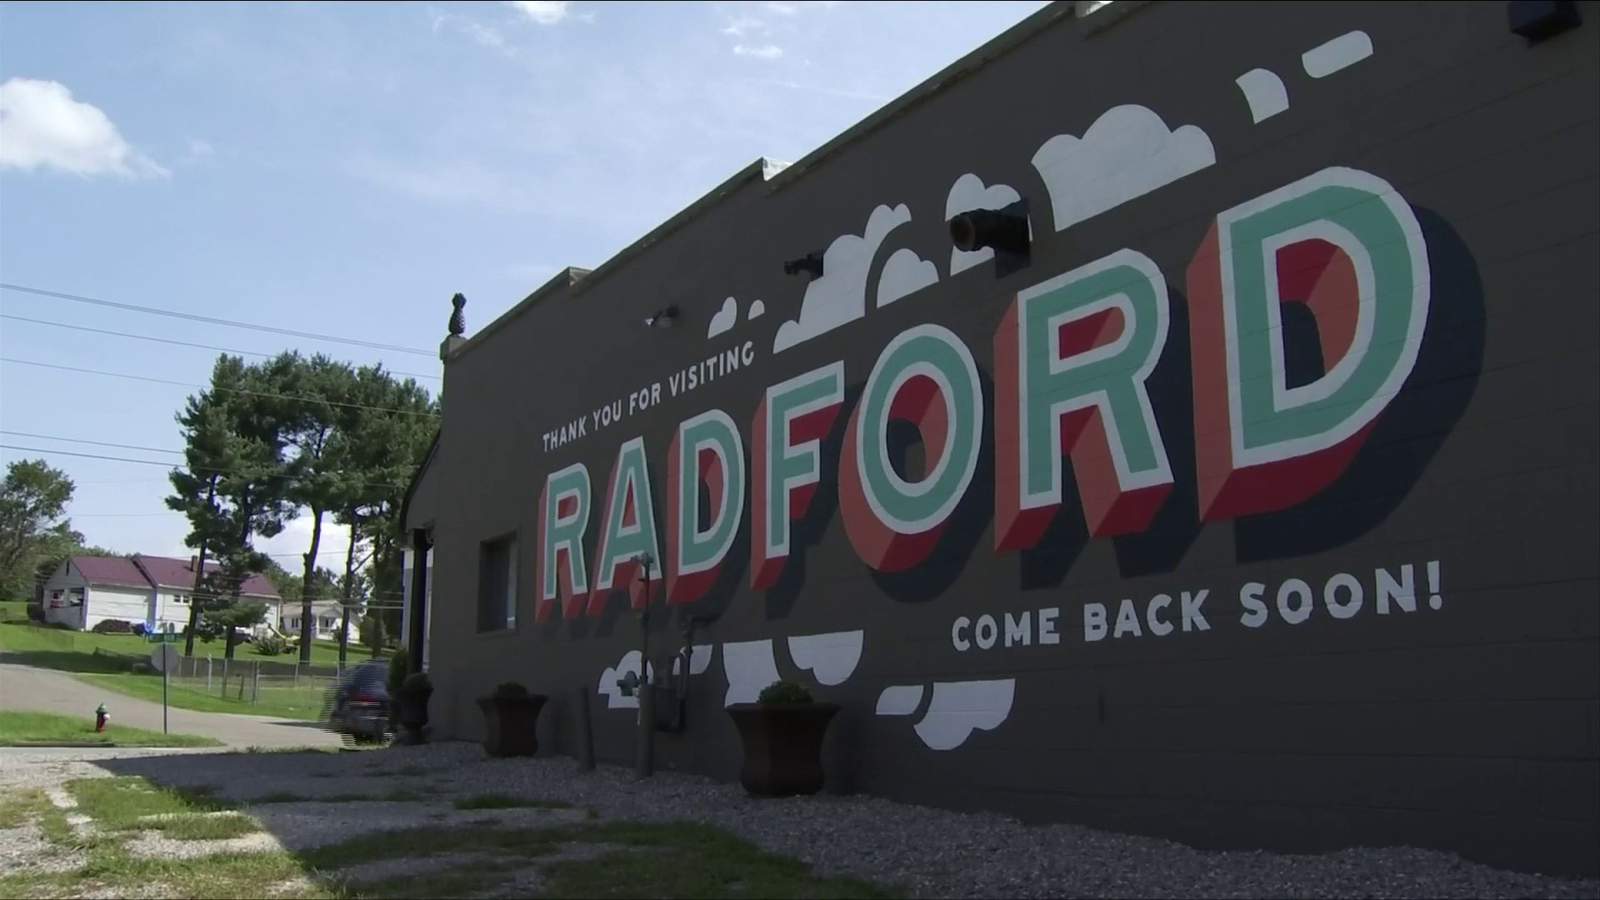 Radford city leaders urge social distancing this Labor Day, as some businesses close dining rooms